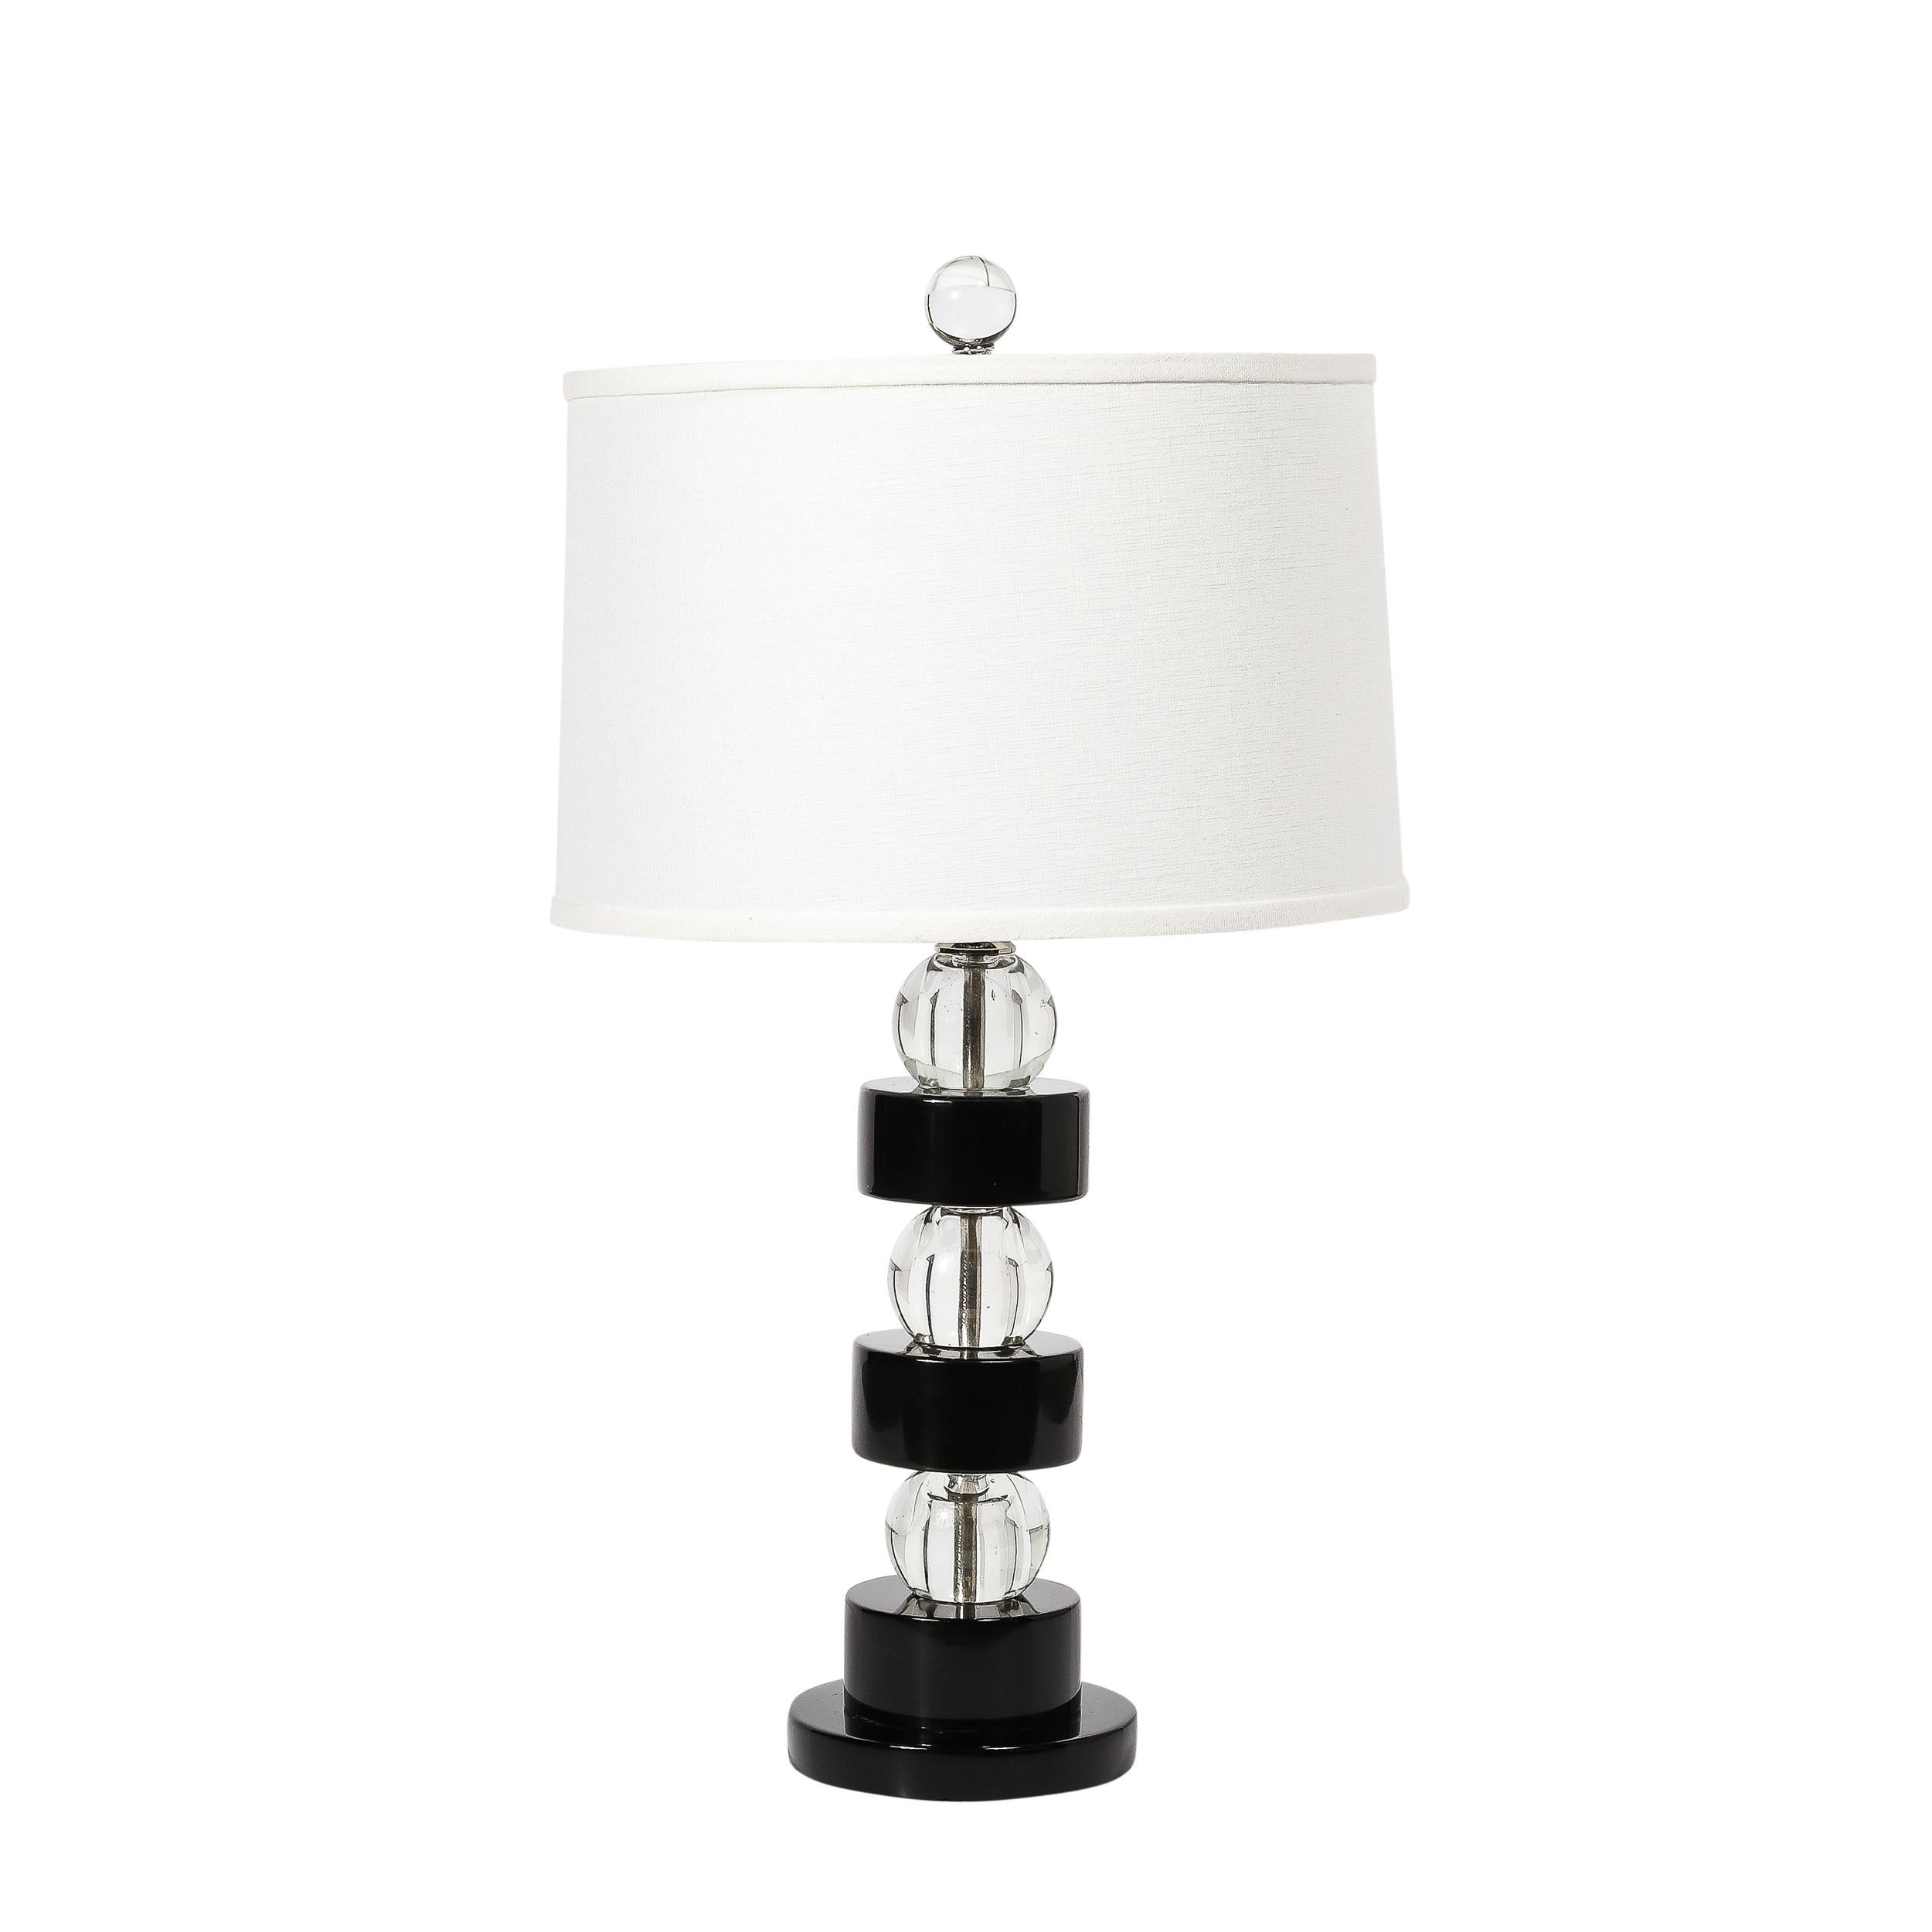 This unique and sophisticated Pair of Art Deco Stacked Black Lacquer and Glass Ball Table Lamps are by Russel Wright  and originate from the United States, Circa 1930. They feature a stacked construction composed of brilliant black lacquered